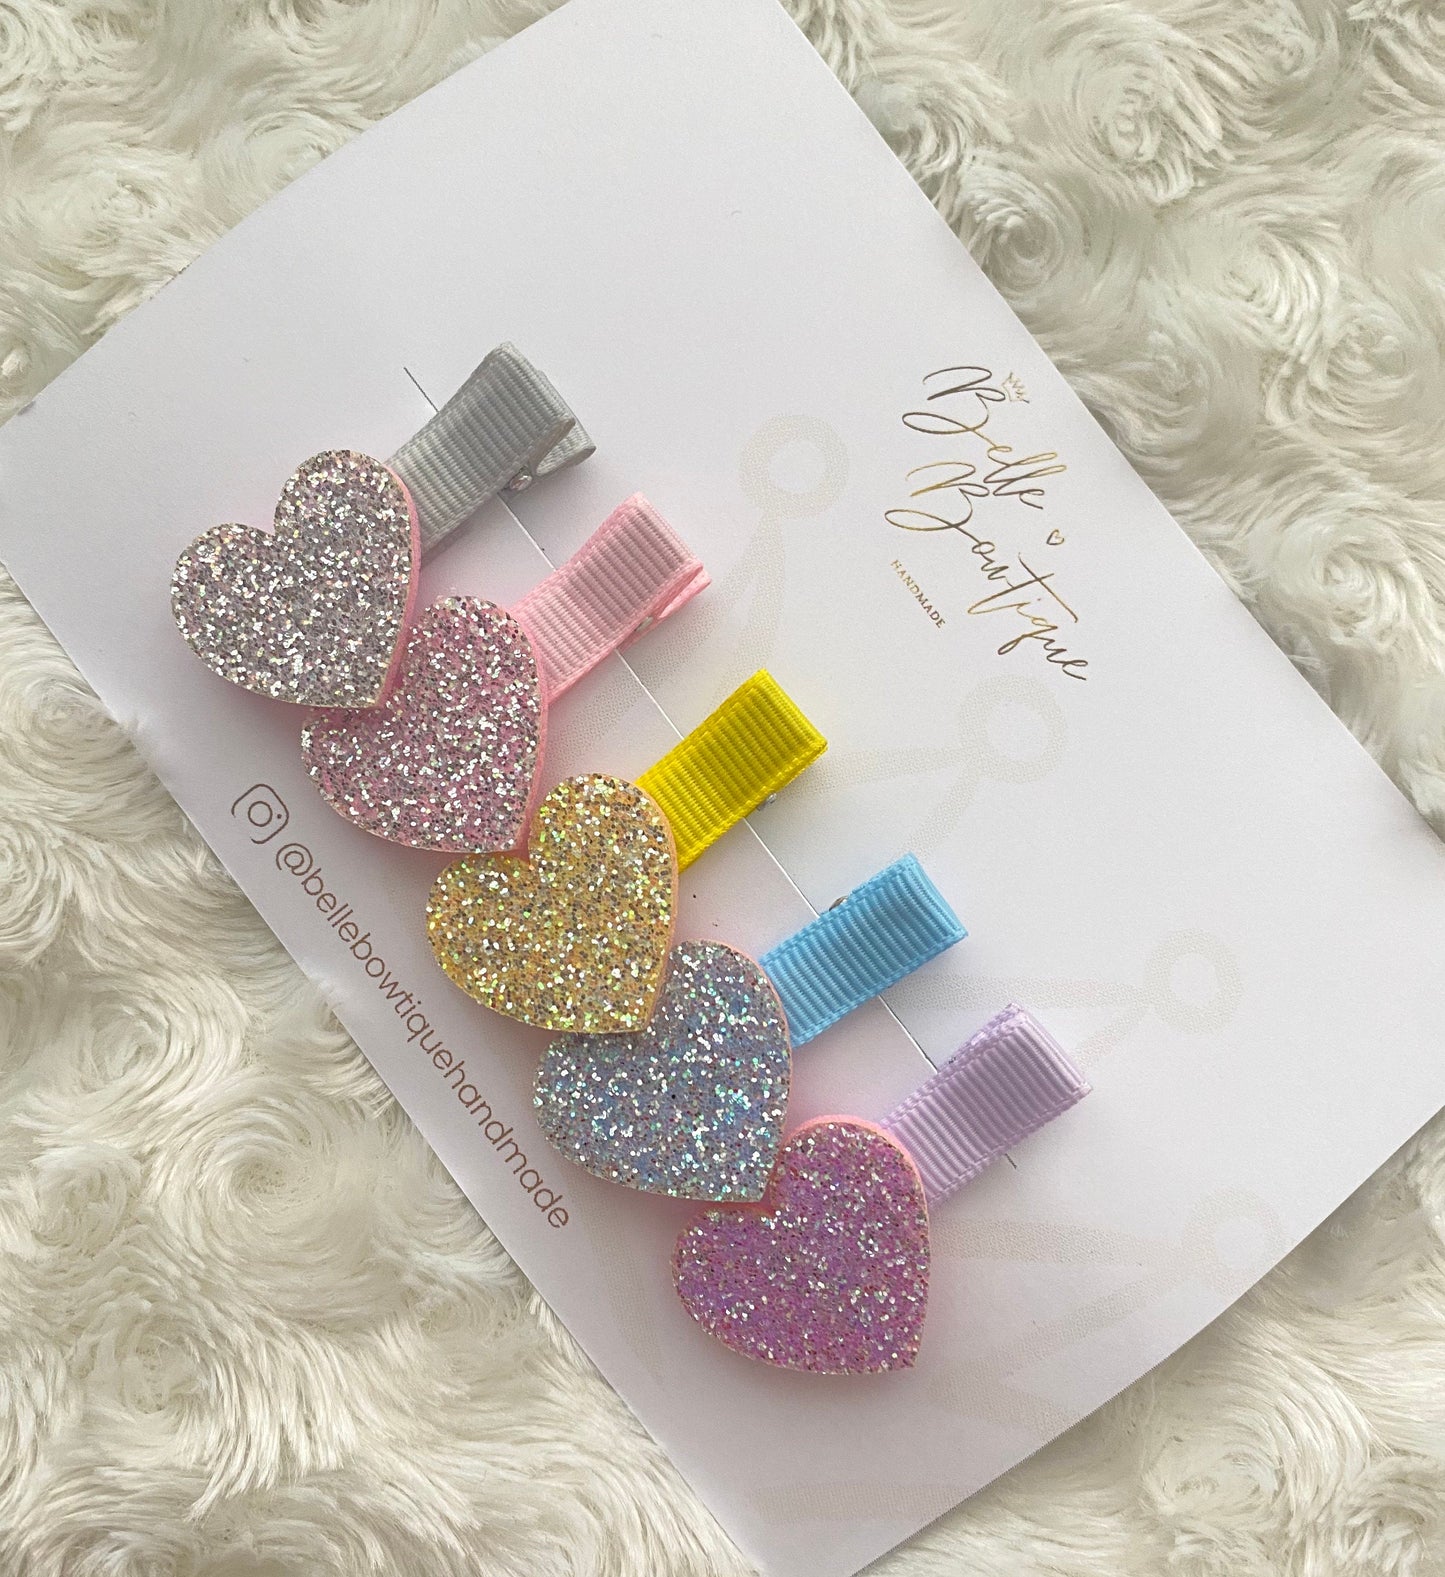 Rainbow Heart Ribbon Fringe Clips Pack of 5 - Small Clips - Mini Clips - Clip Pack - Baby Hair Clips - Toddler Hair Clips - Lined hair clip